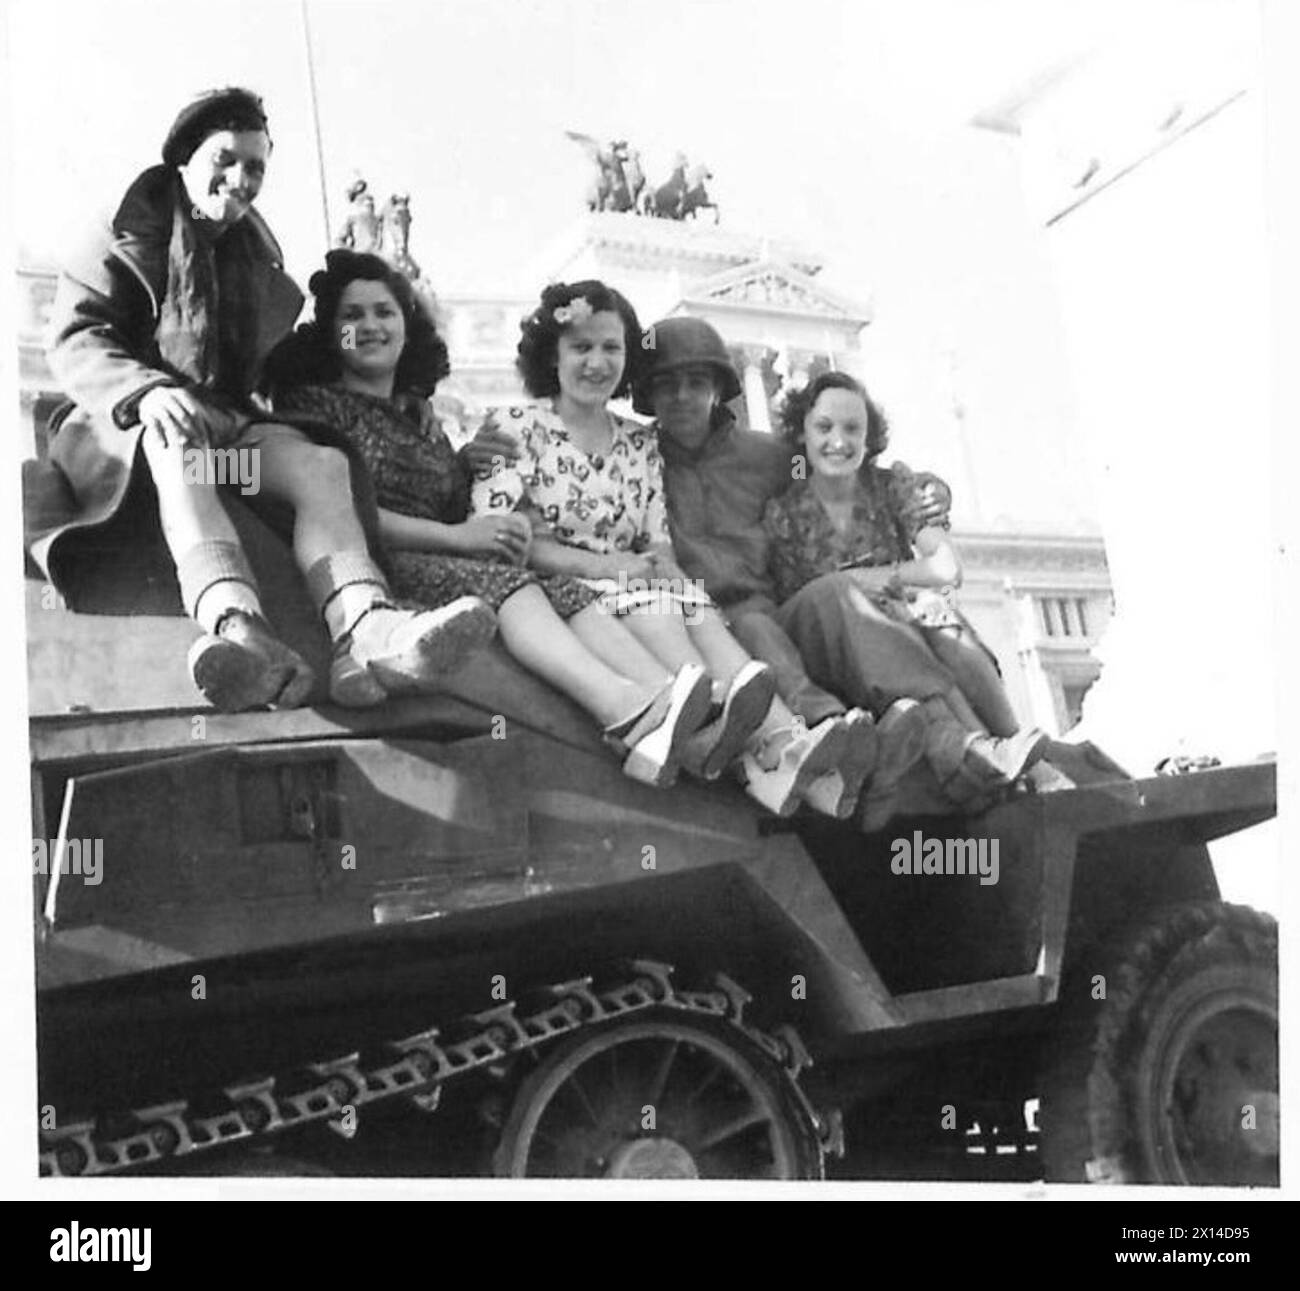 ITALY : SCENES AS ROME SURRENDERS TO FIFTH ARMY - Italian girls seated on a half-track vehicle with Allied soldiers British Army Stock Photo